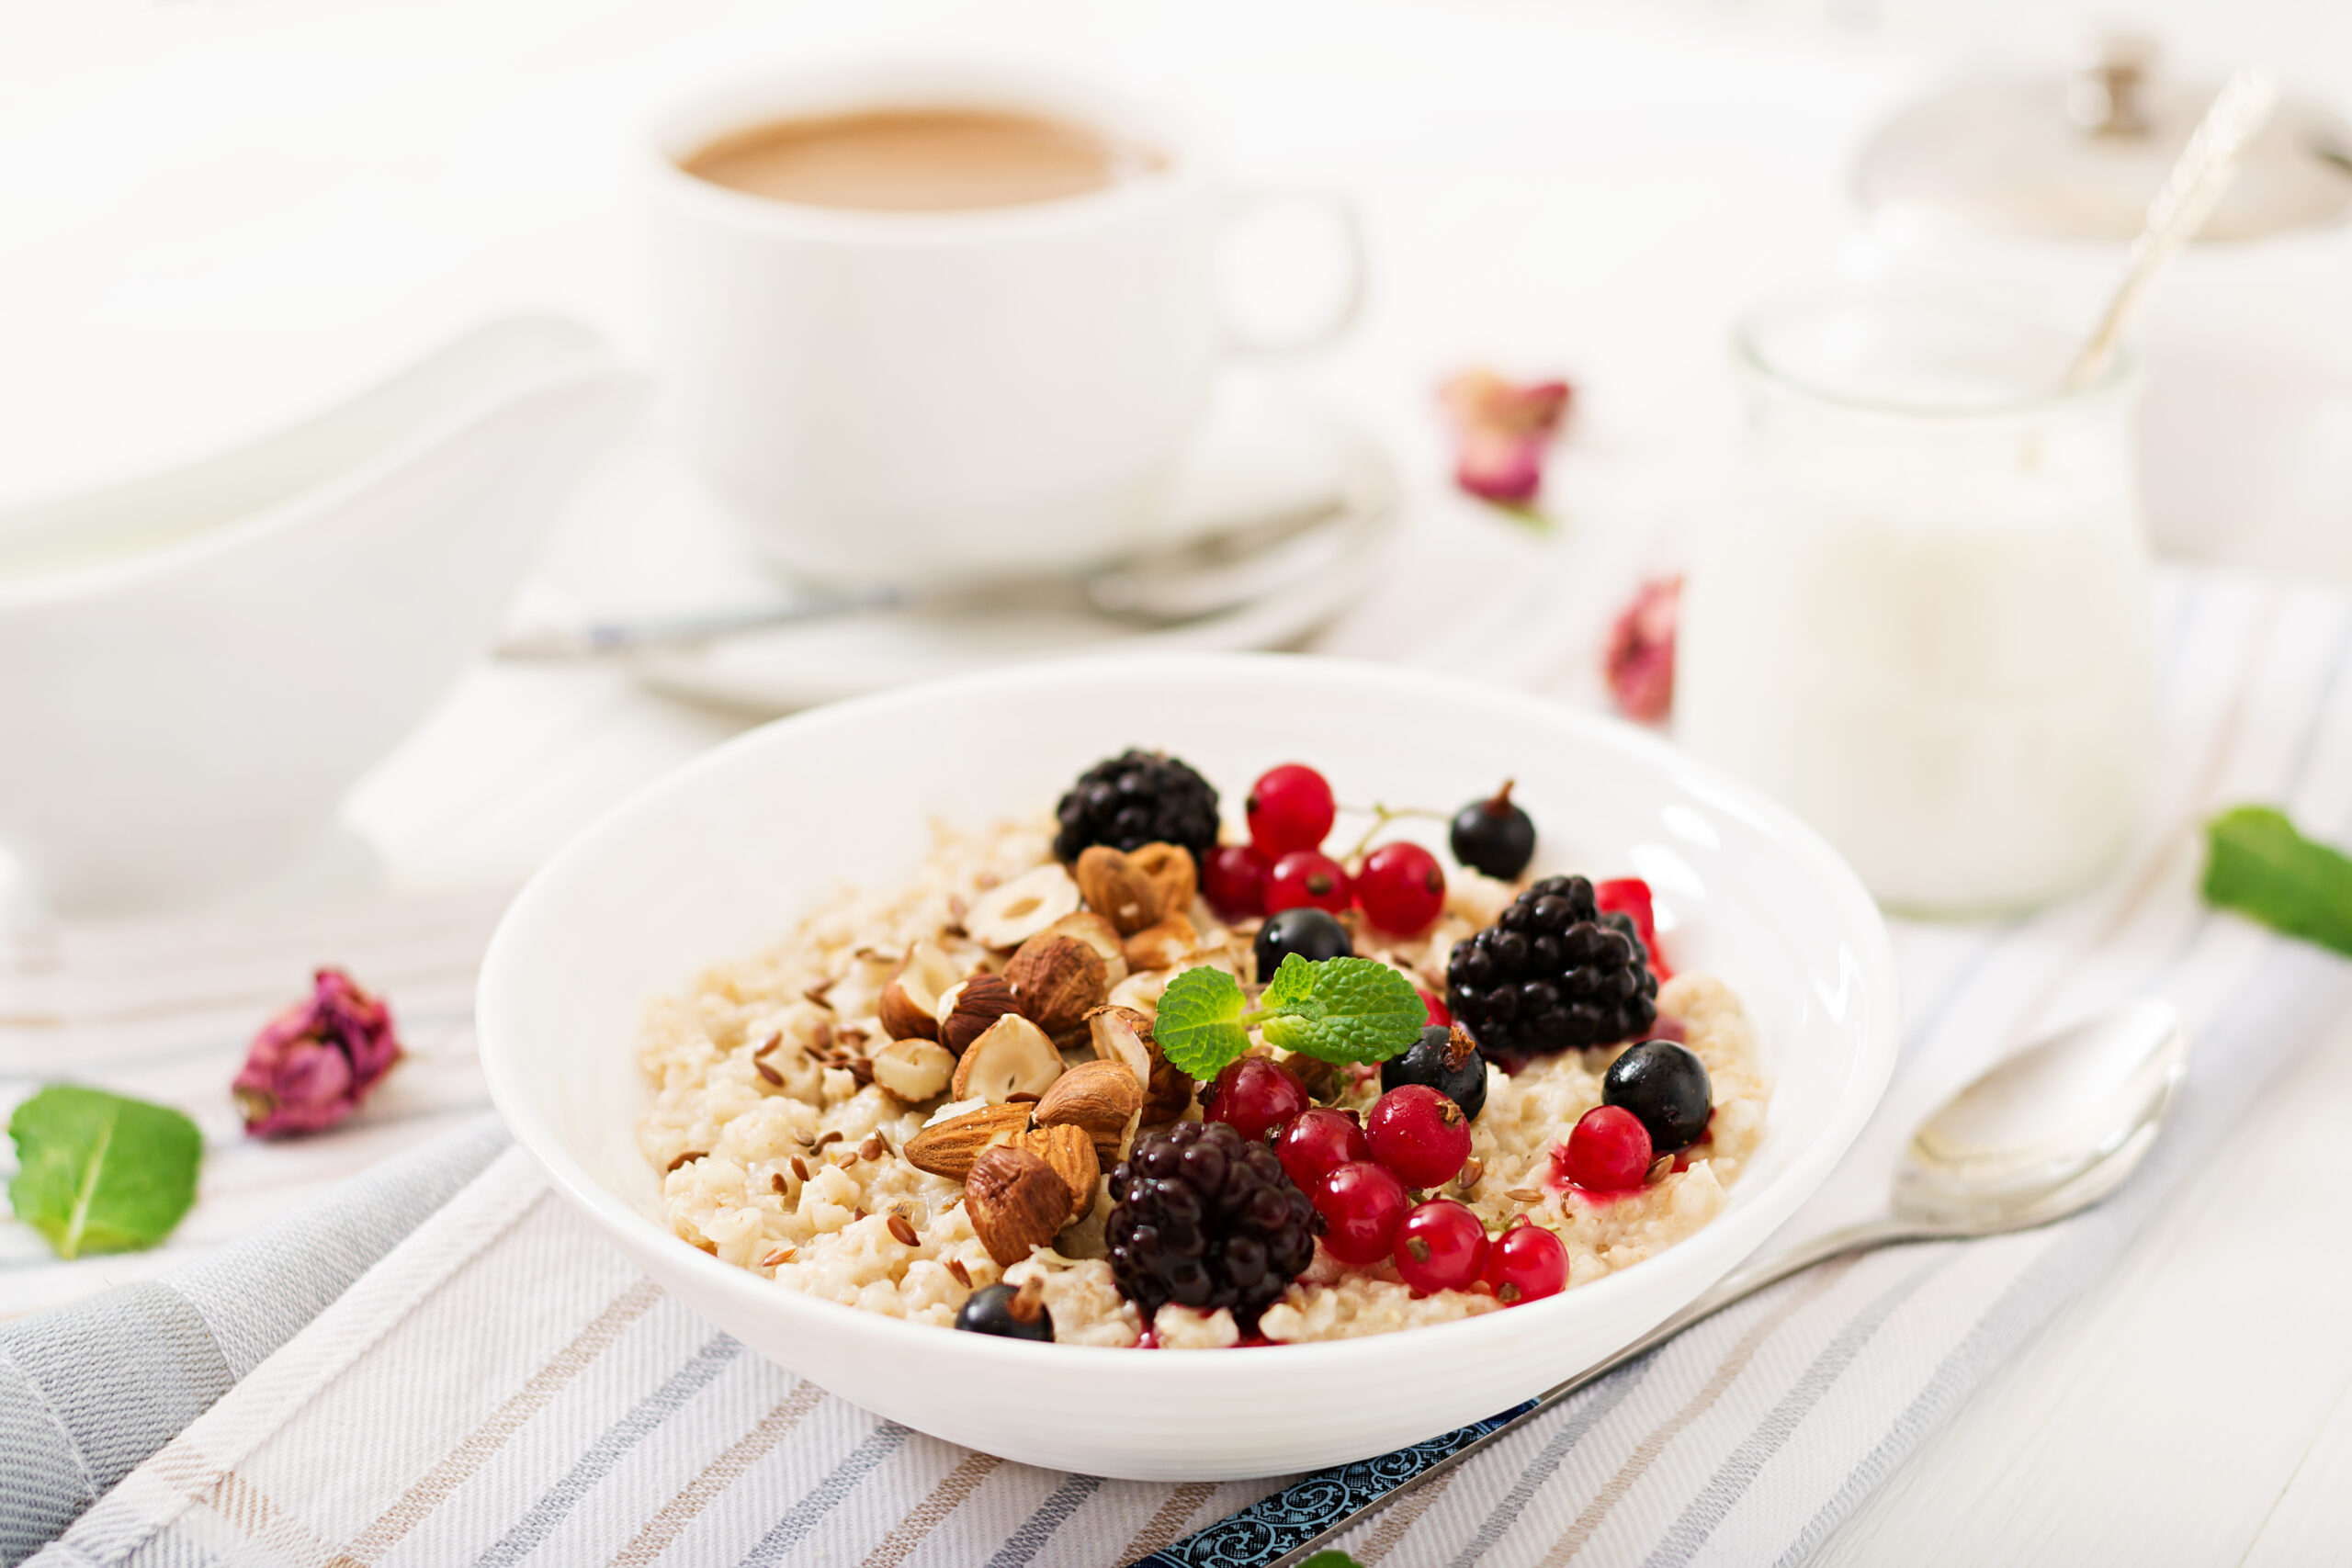 Porridge is a great source of complex carbohydrates